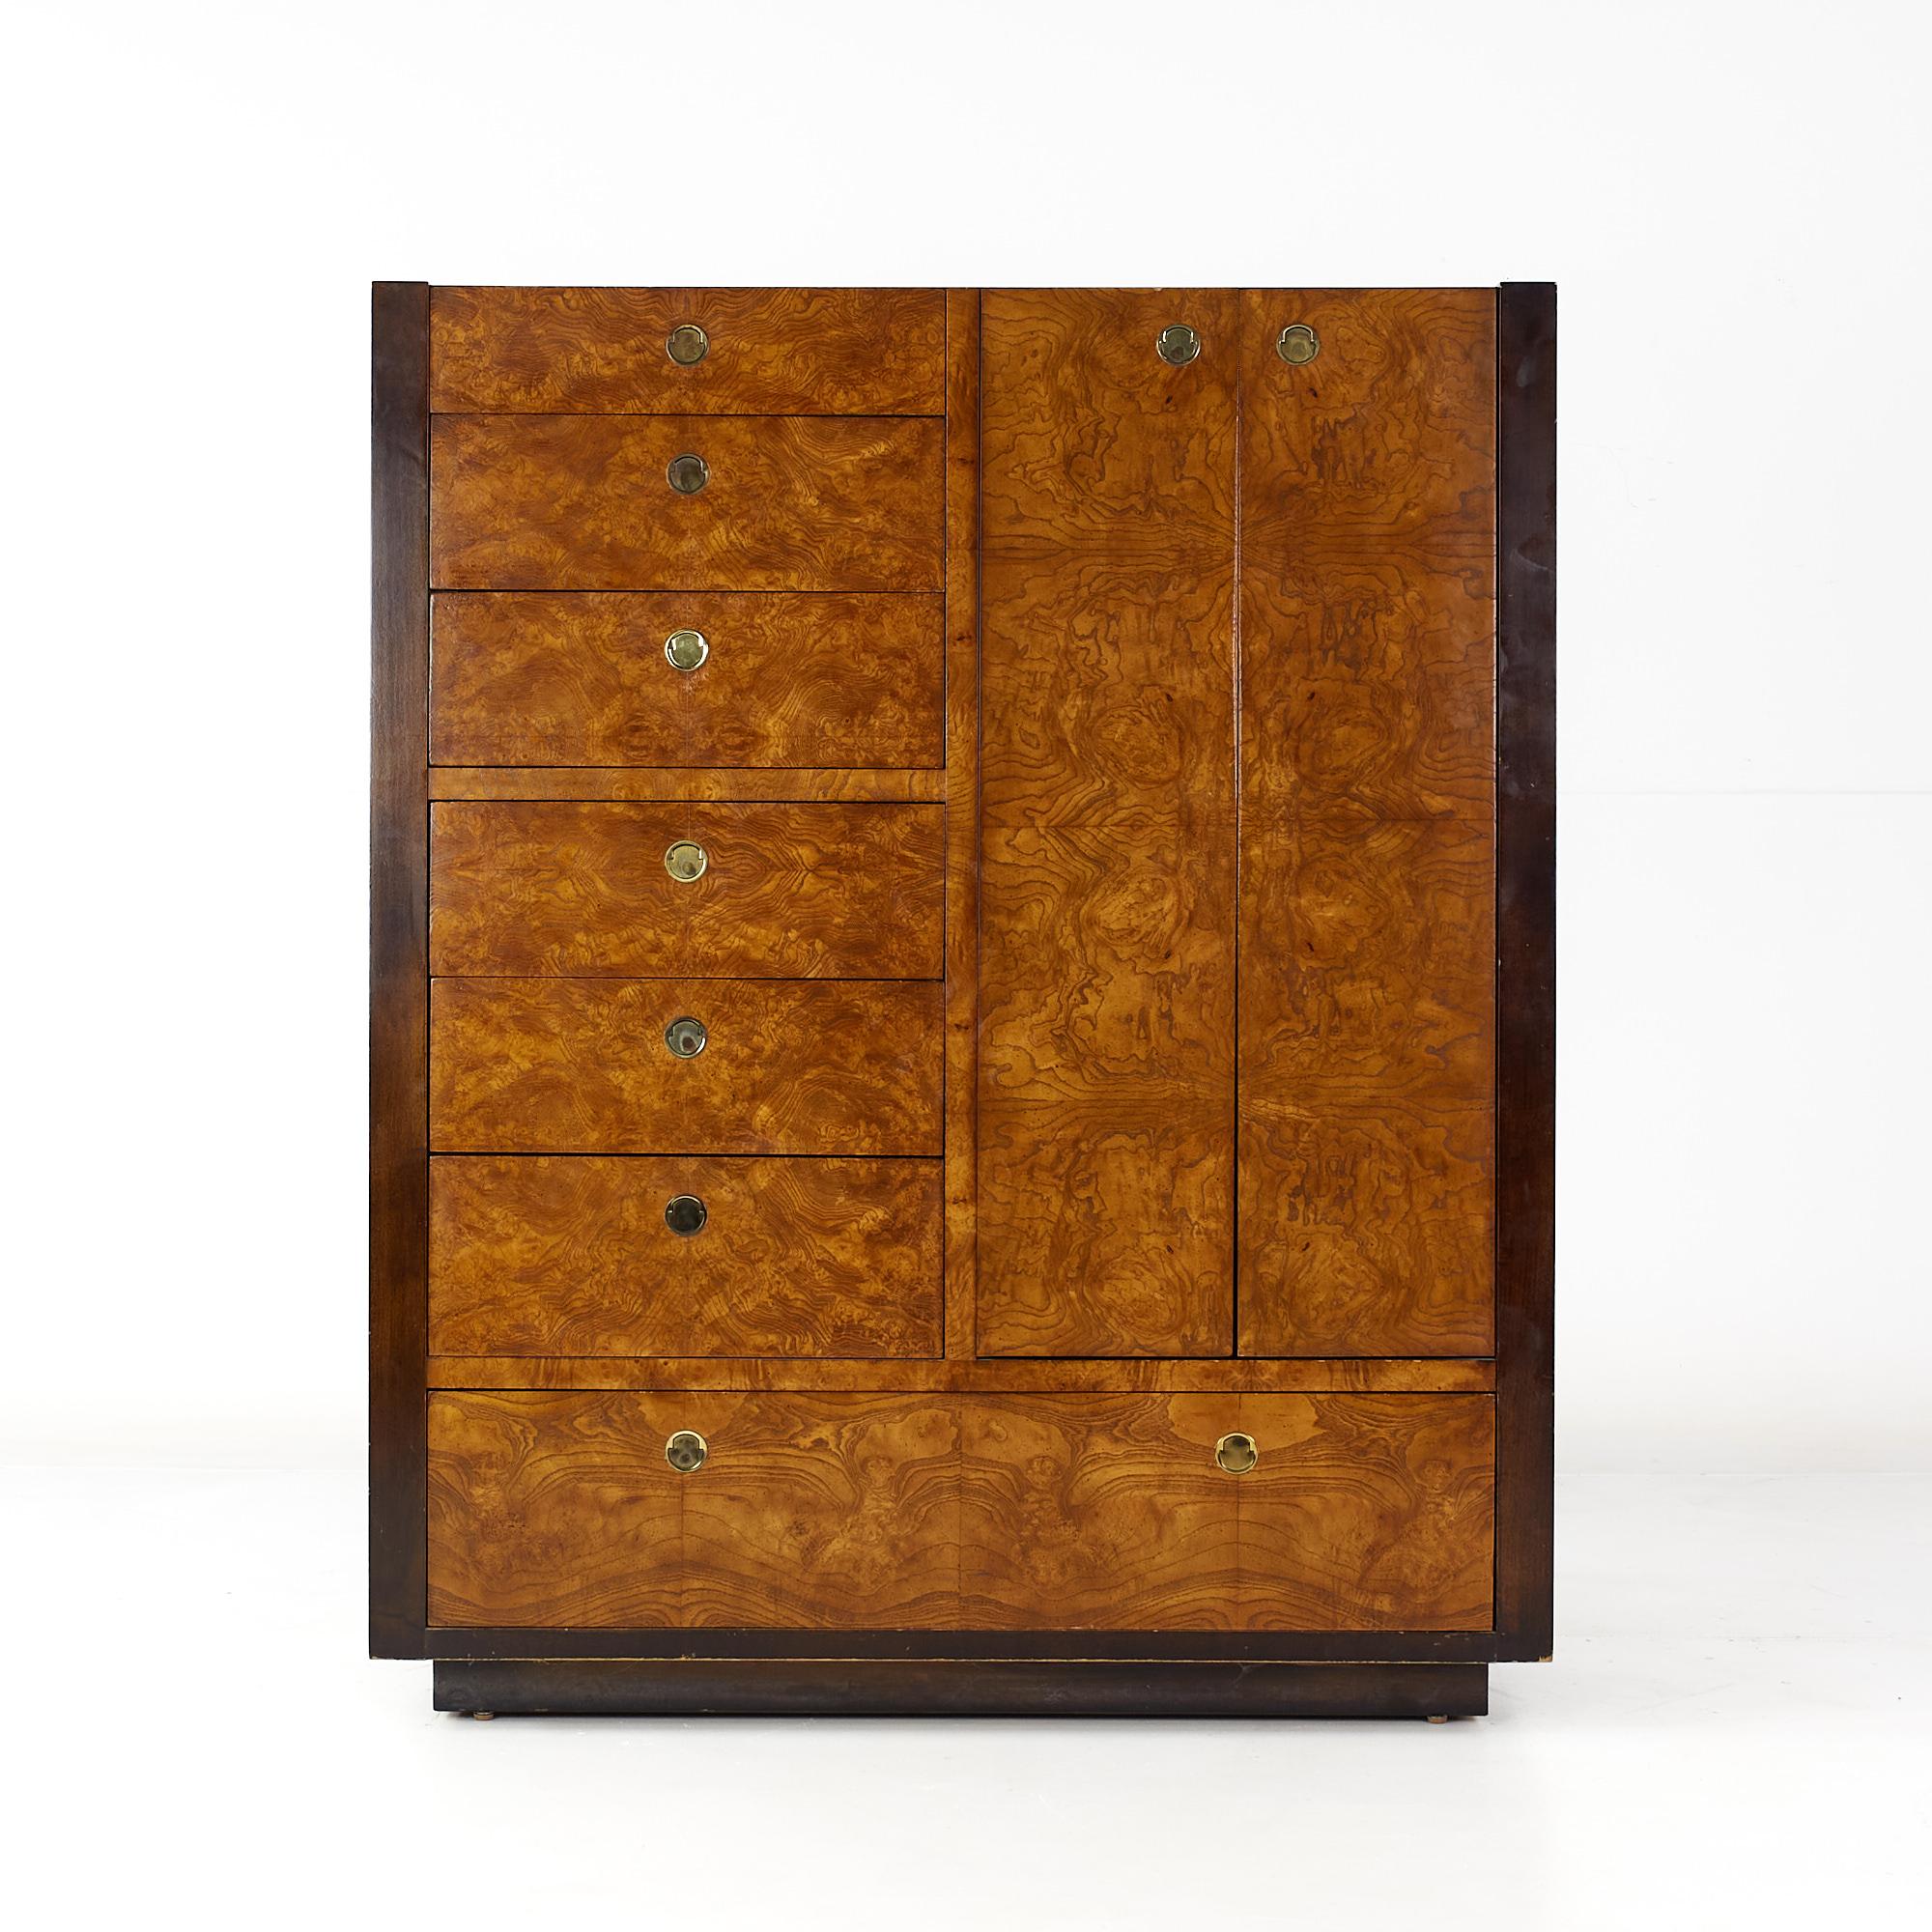 Century Furniture mid century burlwood and brass armoire highboy

This highboy measures: 48 wide x 18 deep x 56.25 inches high

All pieces of furniture can be had in what we call restored vintage condition. That means the piece is restored upon